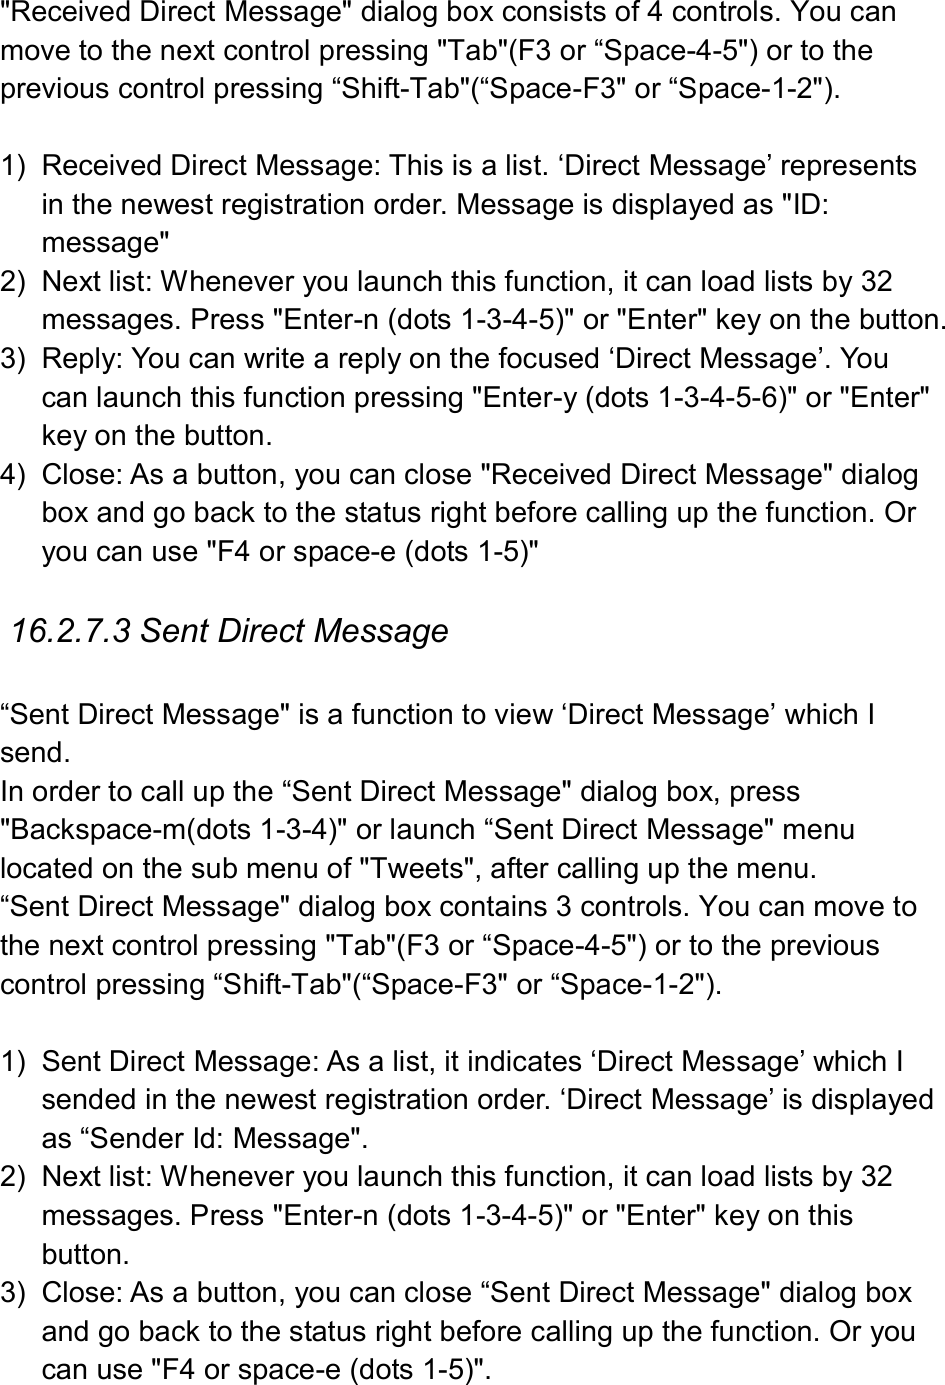  &quot;Received Direct Message&quot; dialog box consists of 4 controls. You can move to the next control pressing &quot;Tab&quot;(F3 or “Space-4-5&quot;) or to the previous control pressing “Shift-Tab&quot;(“Space-F3&quot; or “Space-1-2&quot;).      1)  Received Direct Message: This is a list. ‘Direct Message’ represents in the newest registration order. Message is displayed as &quot;ID: message&quot; 2)  Next list: Whenever you launch this function, it can load lists by 32 messages. Press &quot;Enter-n (dots 1-3-4-5)&quot; or &quot;Enter&quot; key on the button. 3)  Reply: You can write a reply on the focused ‘Direct Message’. You can launch this function pressing &quot;Enter-y (dots 1-3-4-5-6)&quot; or &quot;Enter&quot; key on the button. 4)  Close: As a button, you can close &quot;Received Direct Message&quot; dialog box and go back to the status right before calling up the function. Or you can use &quot;F4 or space-e (dots 1-5)&quot;    16.2.7.3 Sent Direct Message  “Sent Direct Message&quot; is a function to view ‘Direct Message’ which I send. In order to call up the “Sent Direct Message&quot; dialog box, press &quot;Backspace-m(dots 1-3-4)&quot; or launch “Sent Direct Message&quot; menu located on the sub menu of &quot;Tweets&quot;, after calling up the menu.   “Sent Direct Message&quot; dialog box contains 3 controls. You can move to the next control pressing &quot;Tab&quot;(F3 or “Space-4-5&quot;) or to the previous control pressing “Shift-Tab&quot;(“Space-F3&quot; or “Space-1-2&quot;).    1)  Sent Direct Message: As a list, it indicates ‘Direct Message’ which I sended in the newest registration order. ‘Direct Message’ is displayed as “Sender Id: Message&quot;. 2)  Next list: Whenever you launch this function, it can load lists by 32 messages. Press &quot;Enter-n (dots 1-3-4-5)&quot; or &quot;Enter&quot; key on this button. 3)  Close: As a button, you can close “Sent Direct Message&quot; dialog box and go back to the status right before calling up the function. Or you can use &quot;F4 or space-e (dots 1-5)&quot;.   